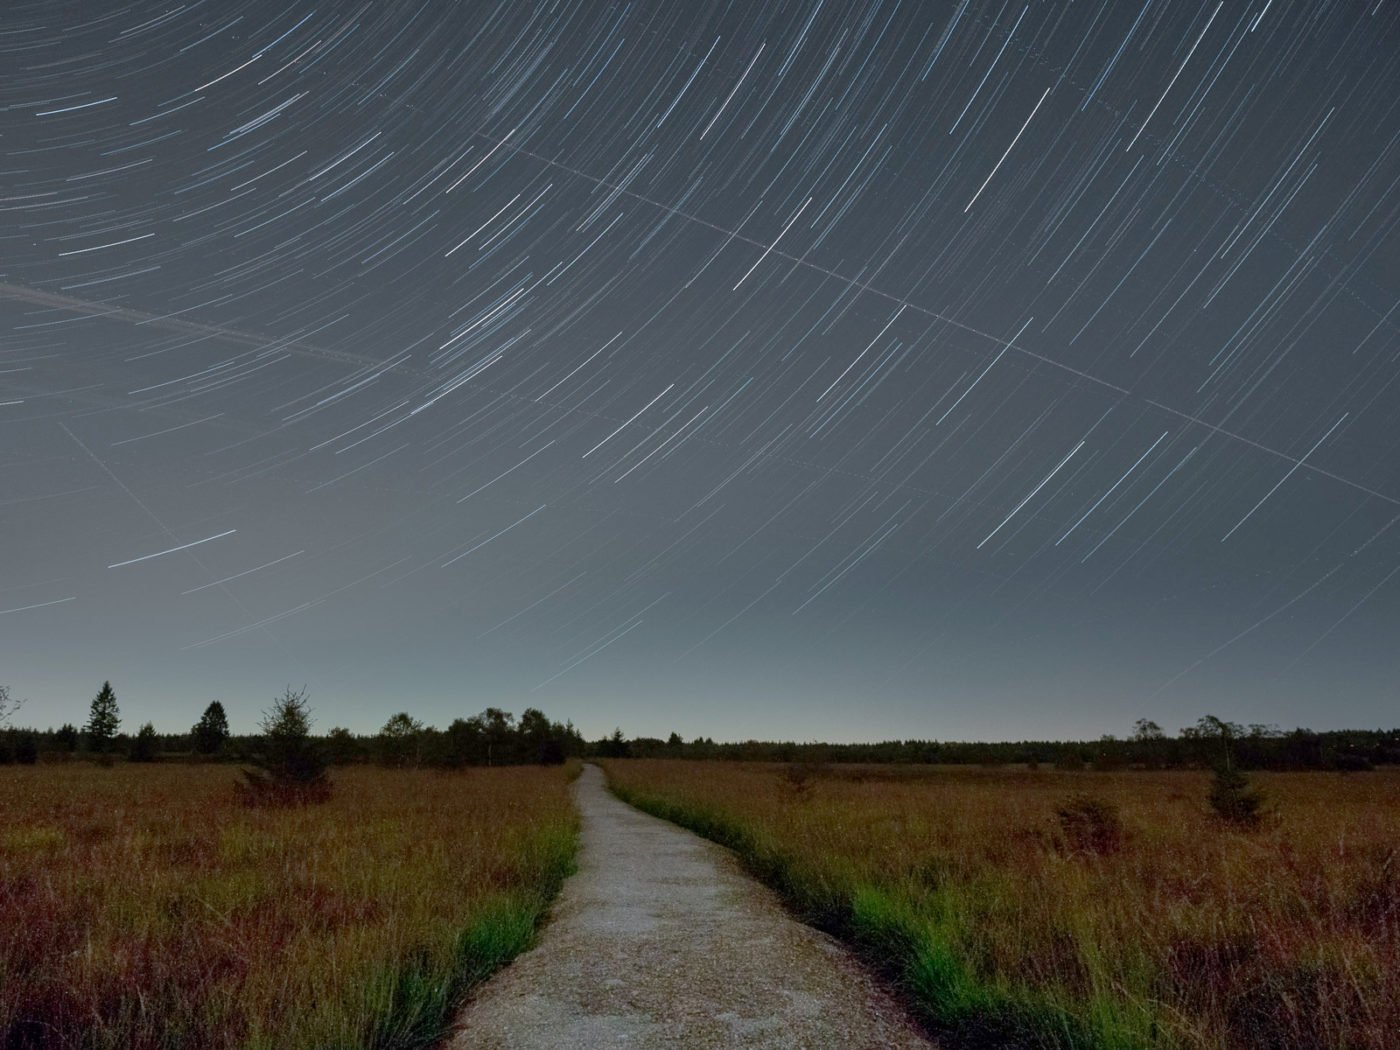 Star trails for Milky Way photography